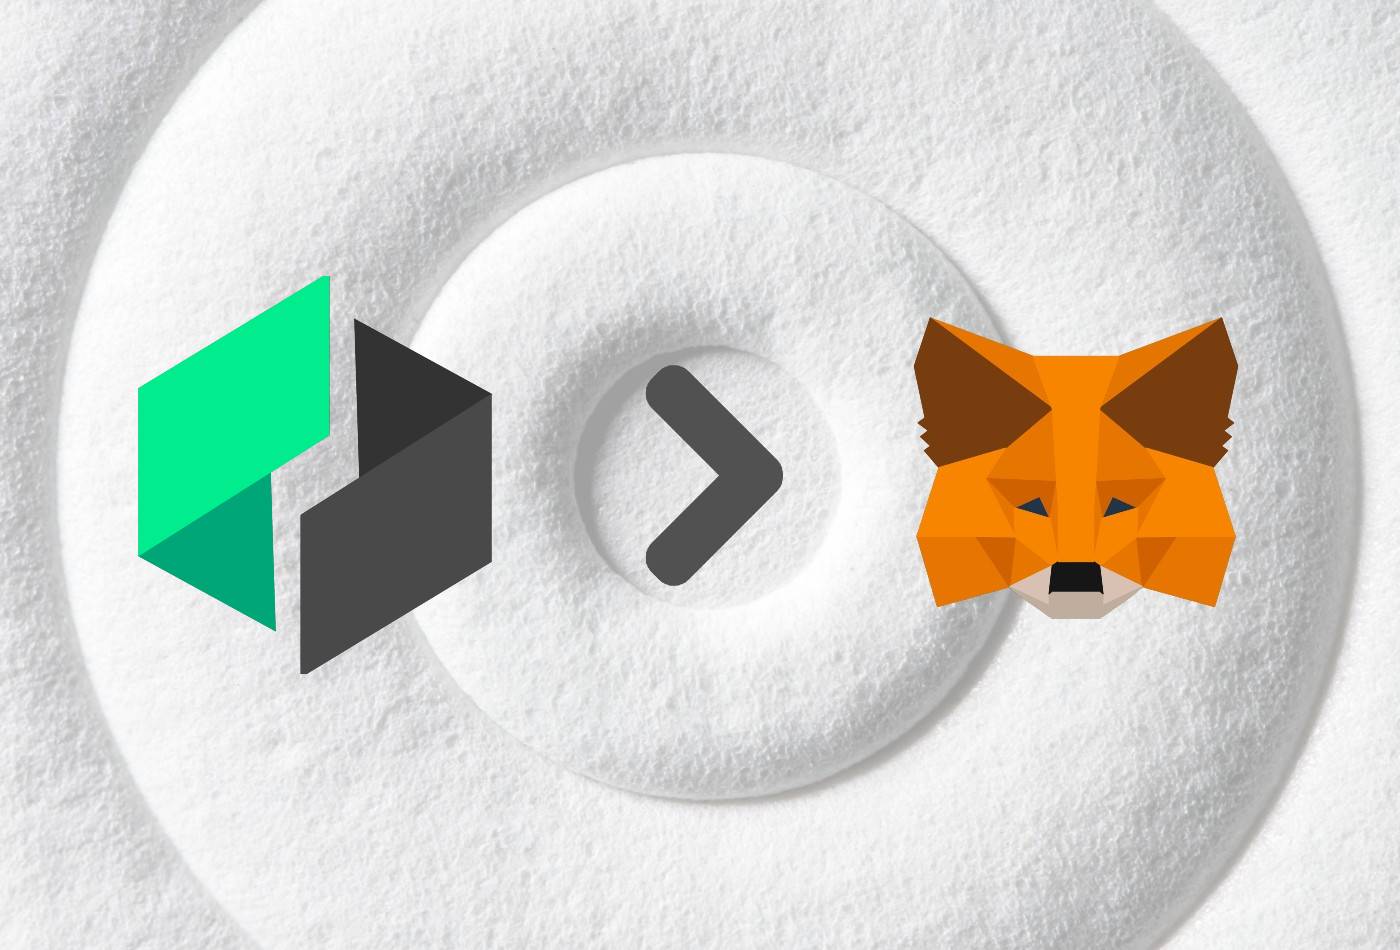 How To Add Ubiq (UBQ) To MetaMask – The Best Method